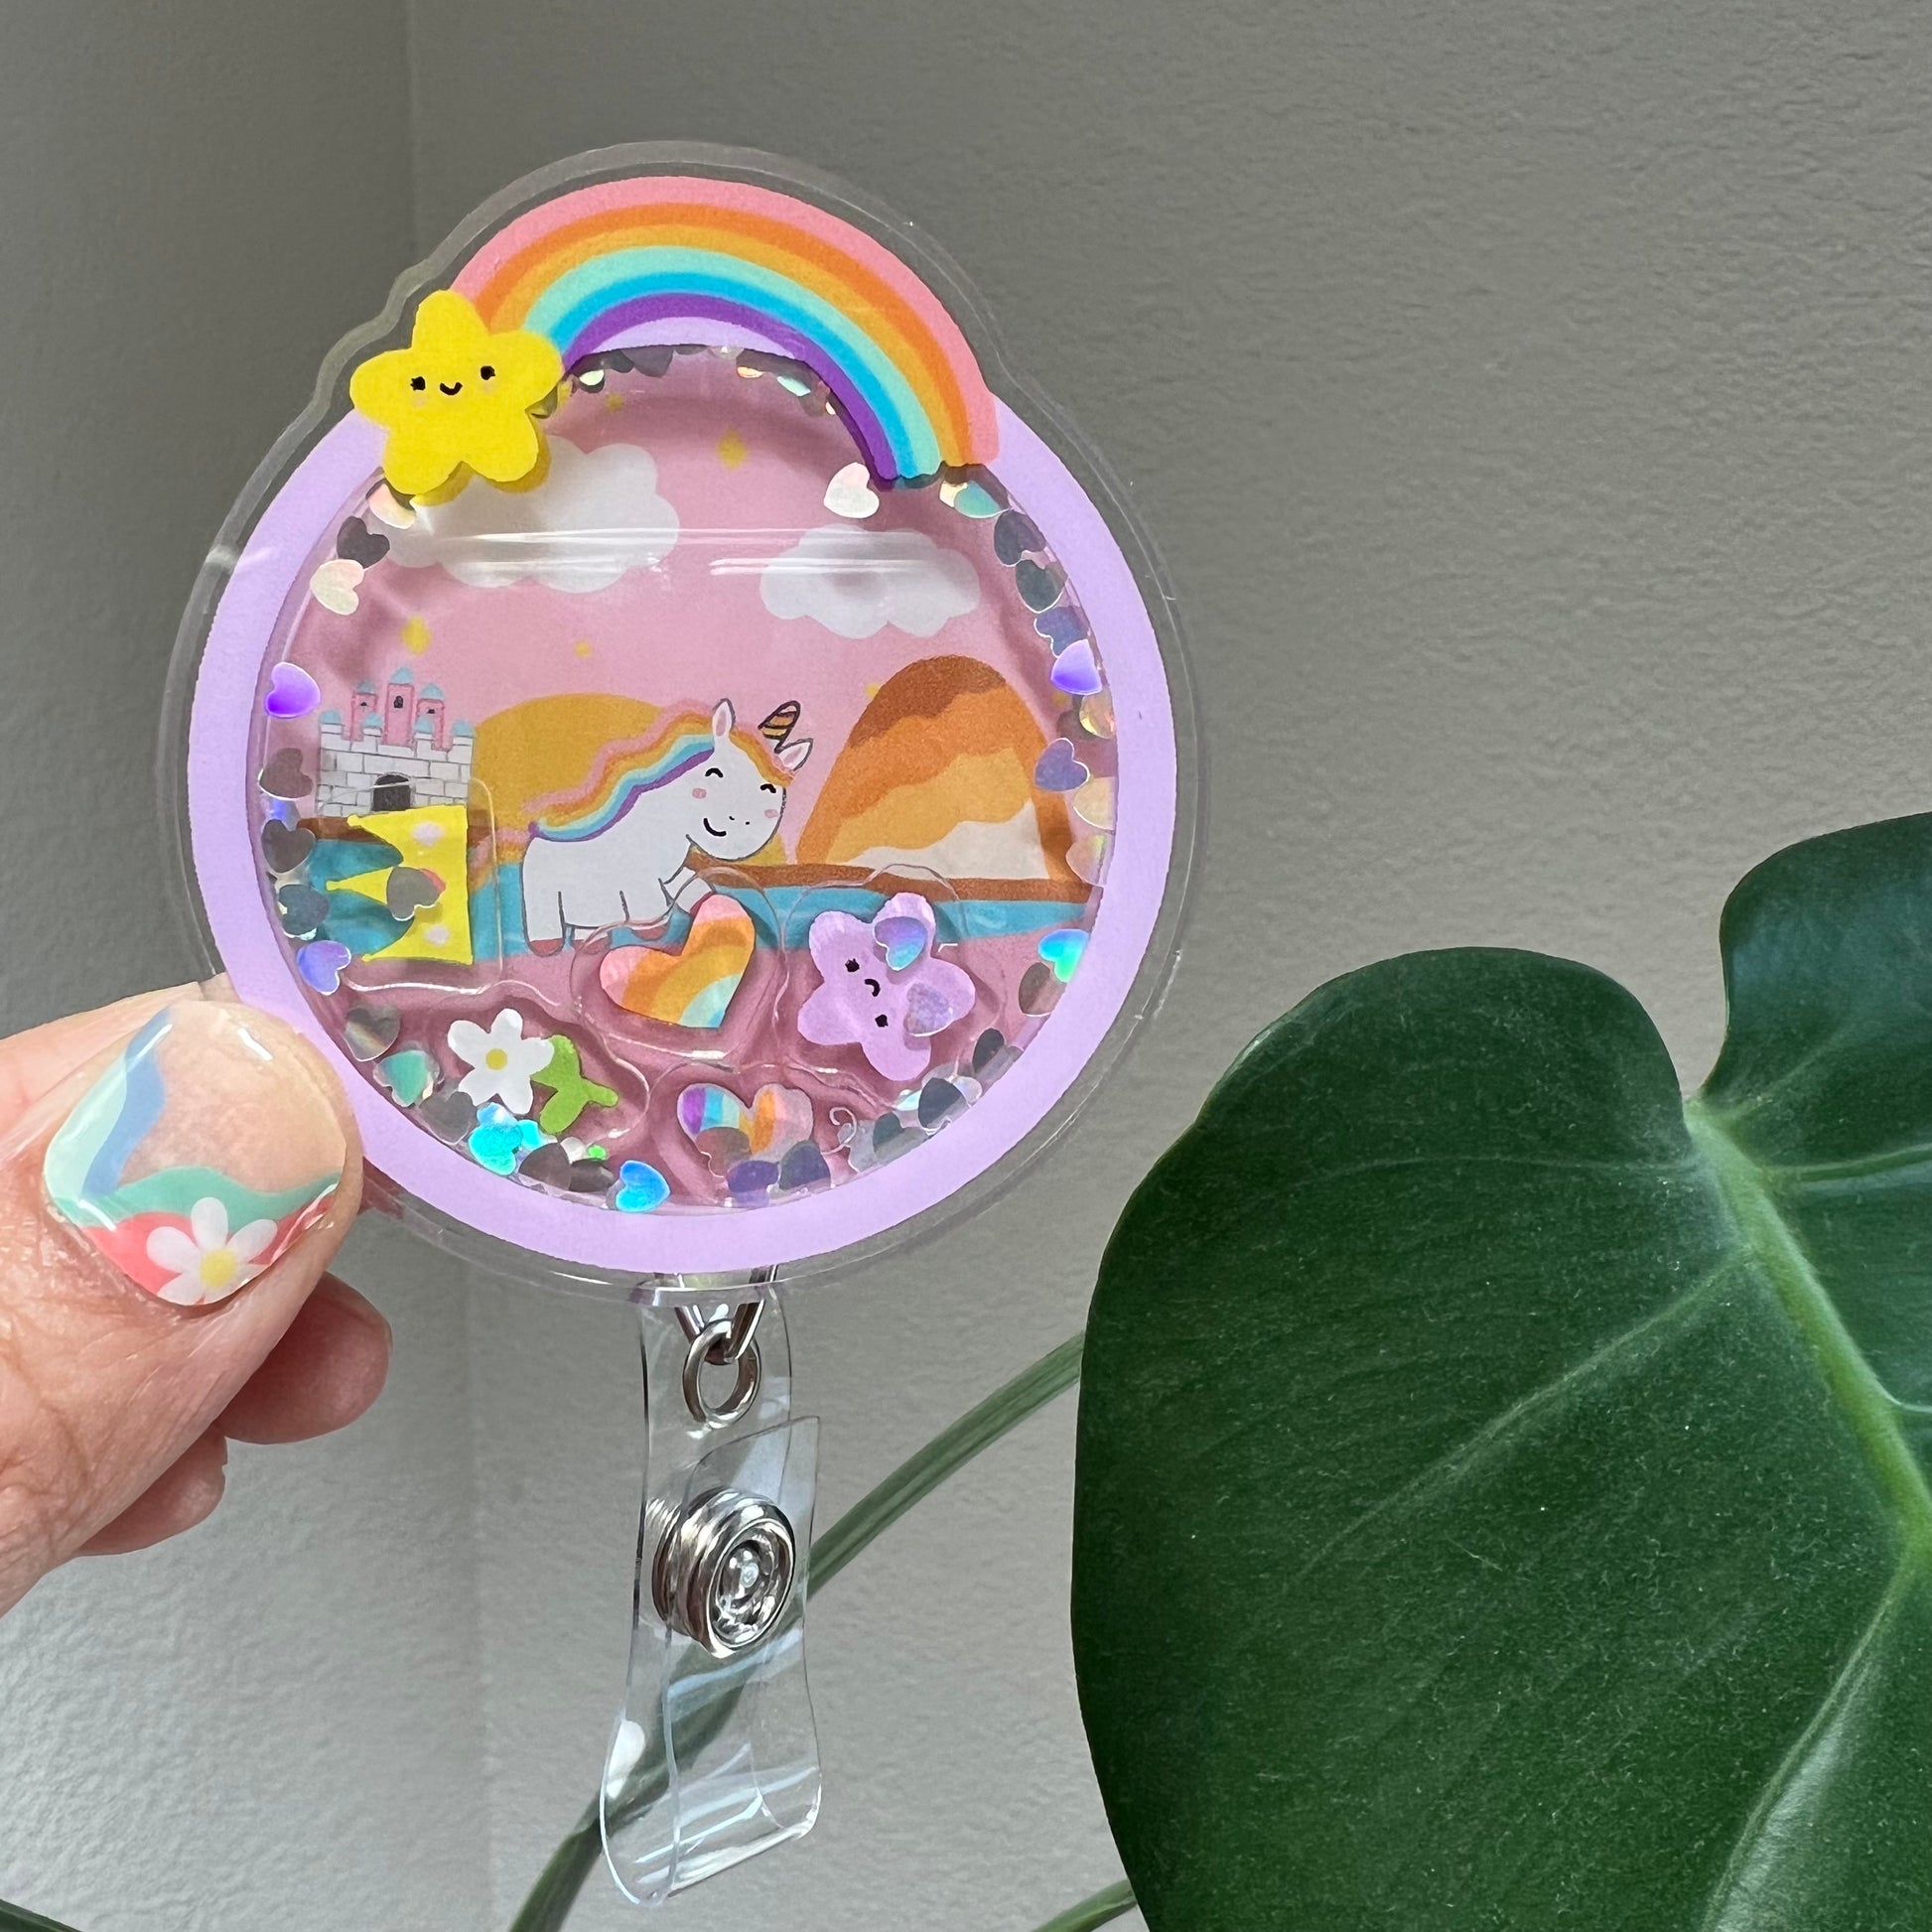 💖NEW ARRIVALS!💖 Shaker Badge Reels filled with glitter or tiny